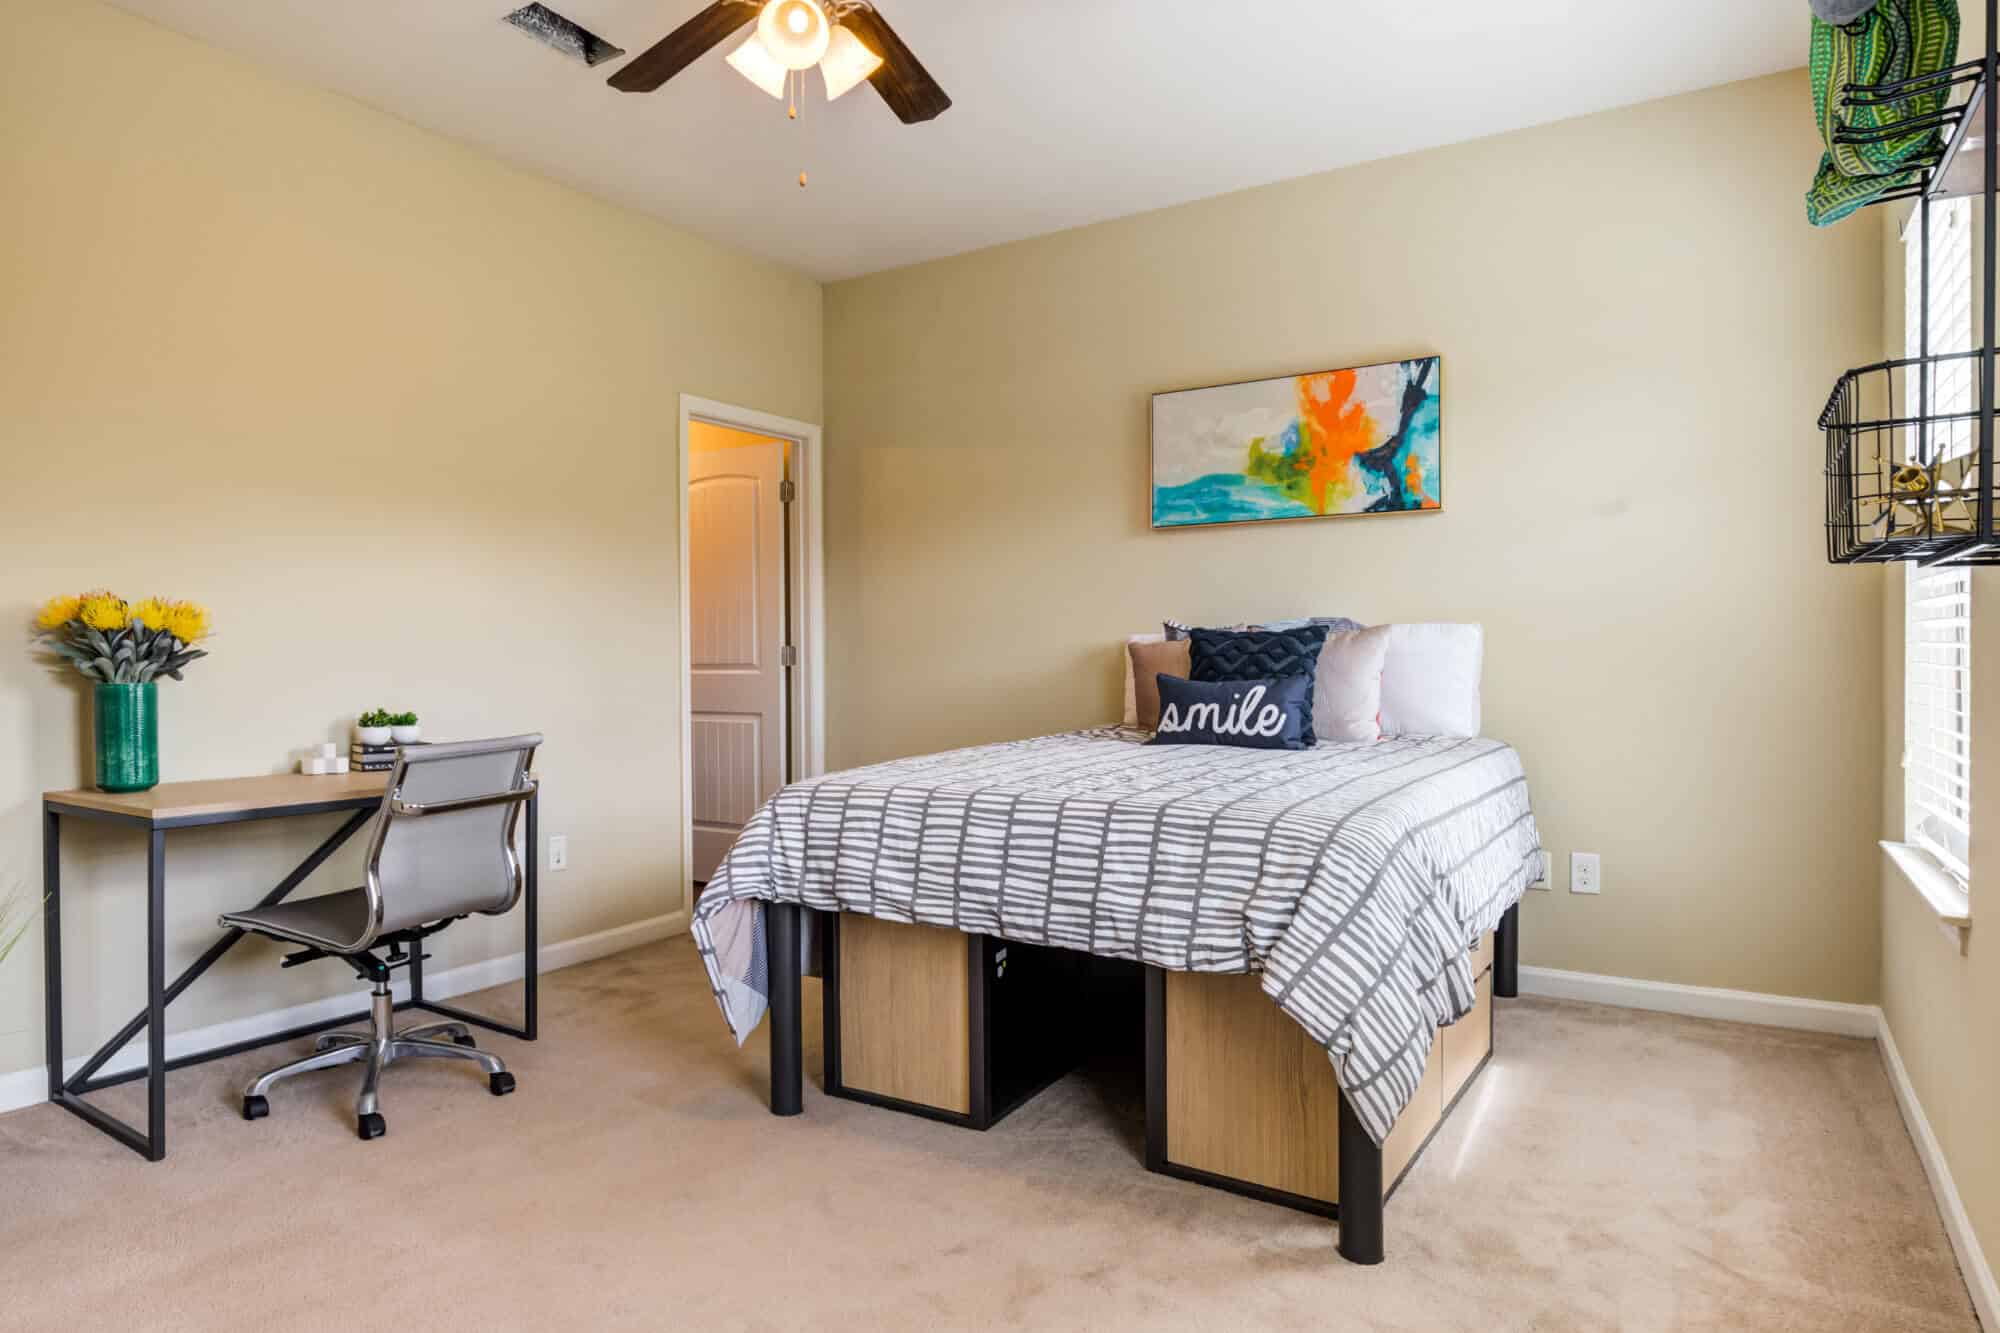 the collective at clemson off campus apartments near clemson university fully furnished private bedrooms